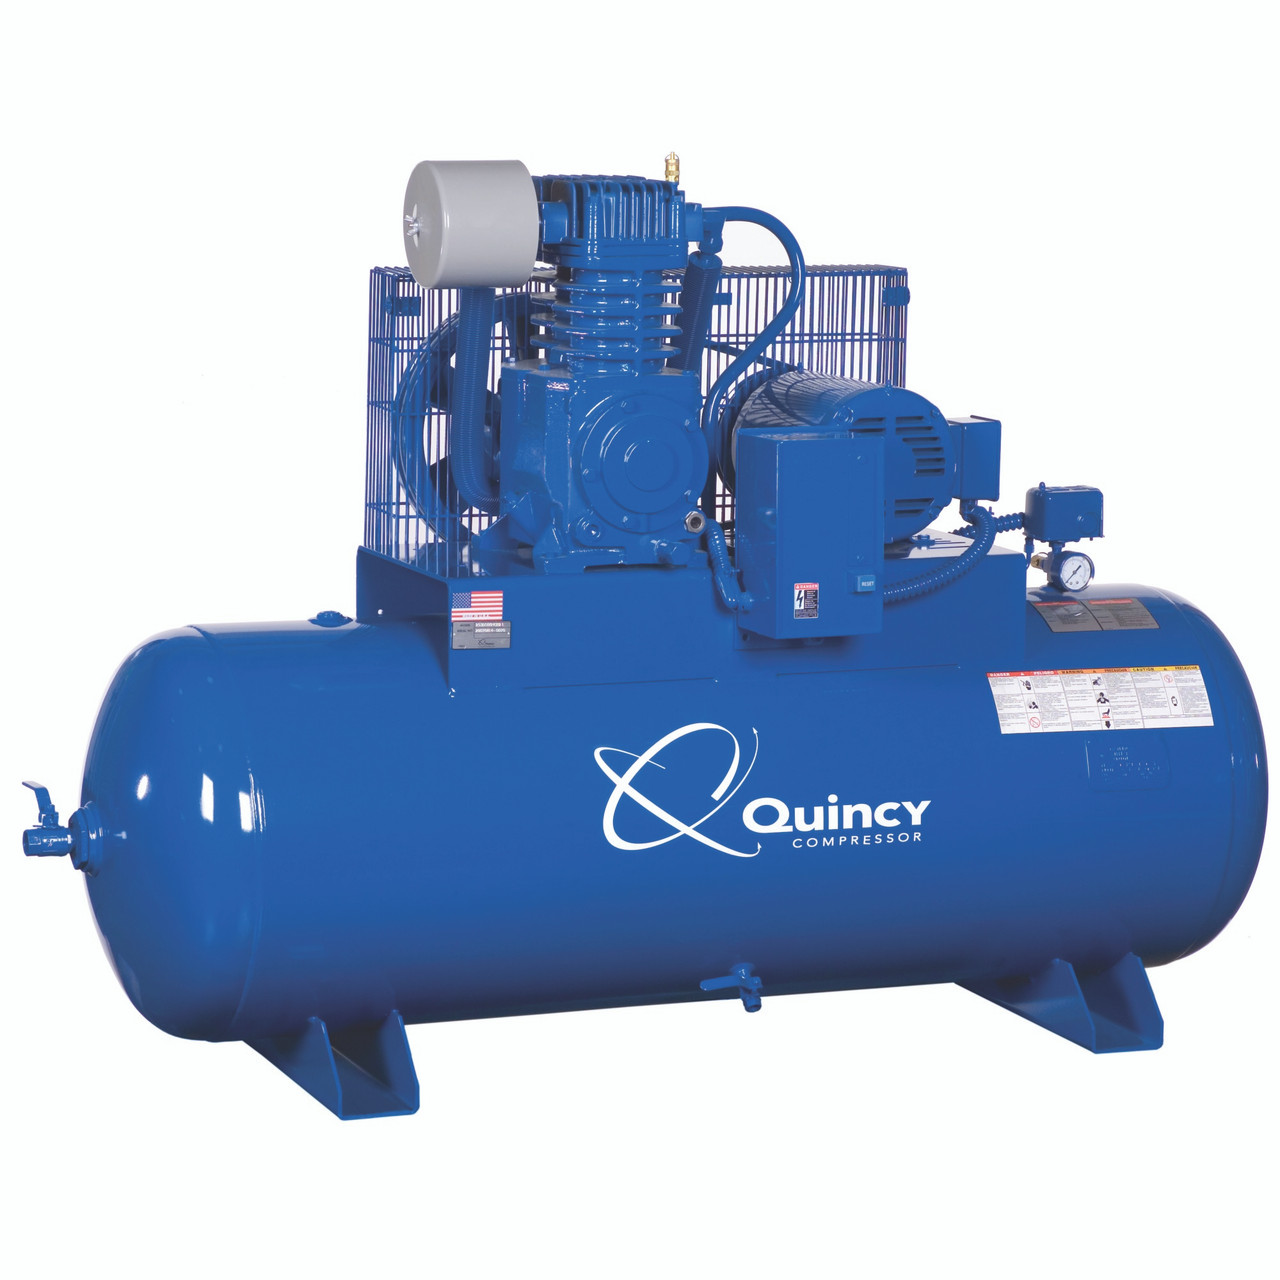 Quincy QP 353CS80HCB23 5 HP PRO, 230 Volt Three Phase, Two Stage, 80 Gallon Horizontal Air Compressor